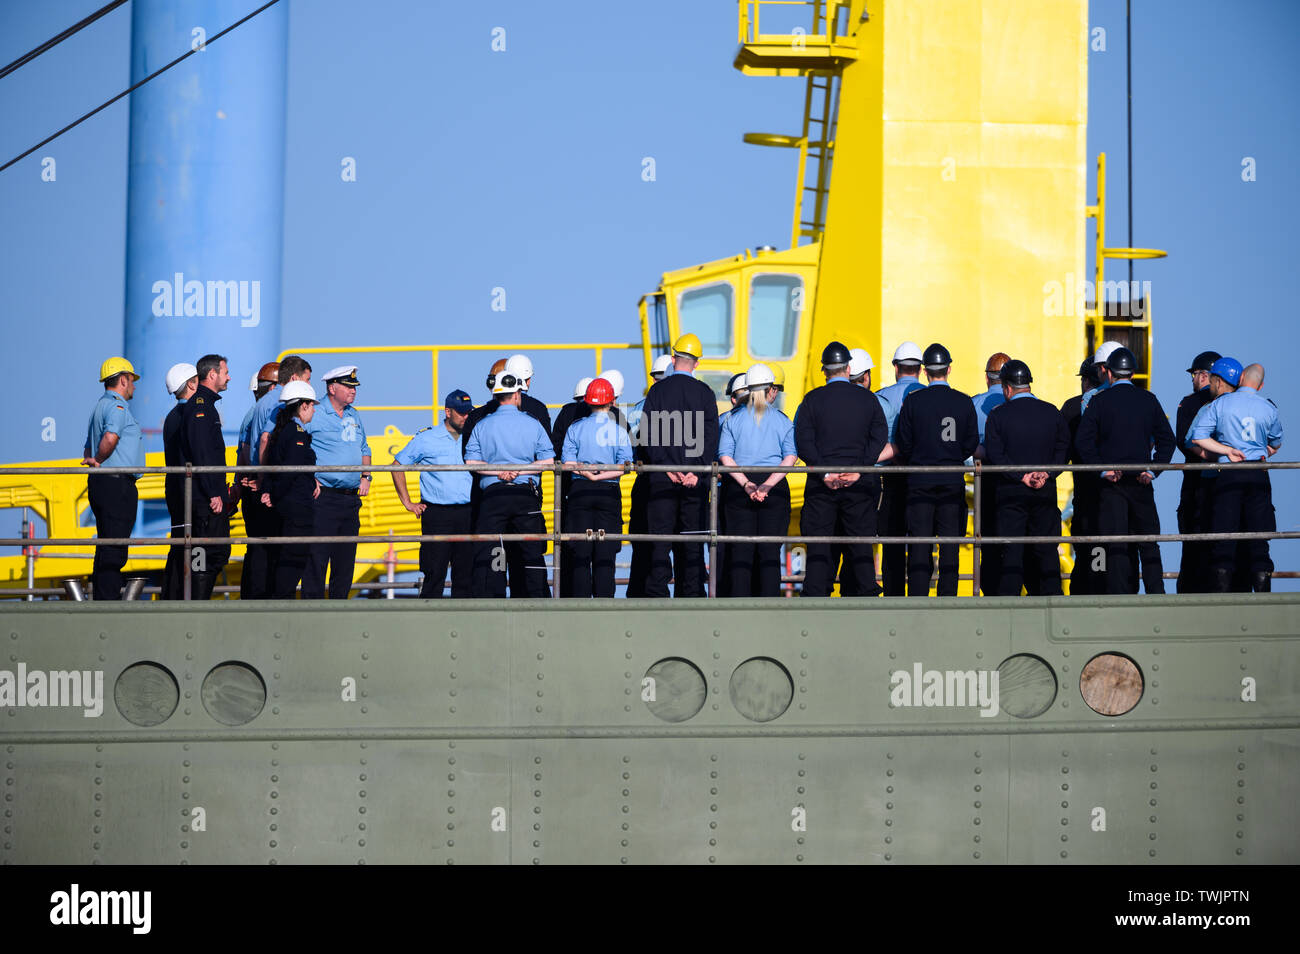 Bremerhaven, Germany. 21st June, 2019. Nils Brandt (7.f.l.), commander of the "Gorch Fock", is standing with the crew on the deck of the naval sailer "Gorch Fock". The naval training ship "Gorch Fock" is being launched in Bremerhaven today after more than three years in the dock. Credit: Mohssen Assanimoghaddam/dpa/Alamy Live News Stock Photo